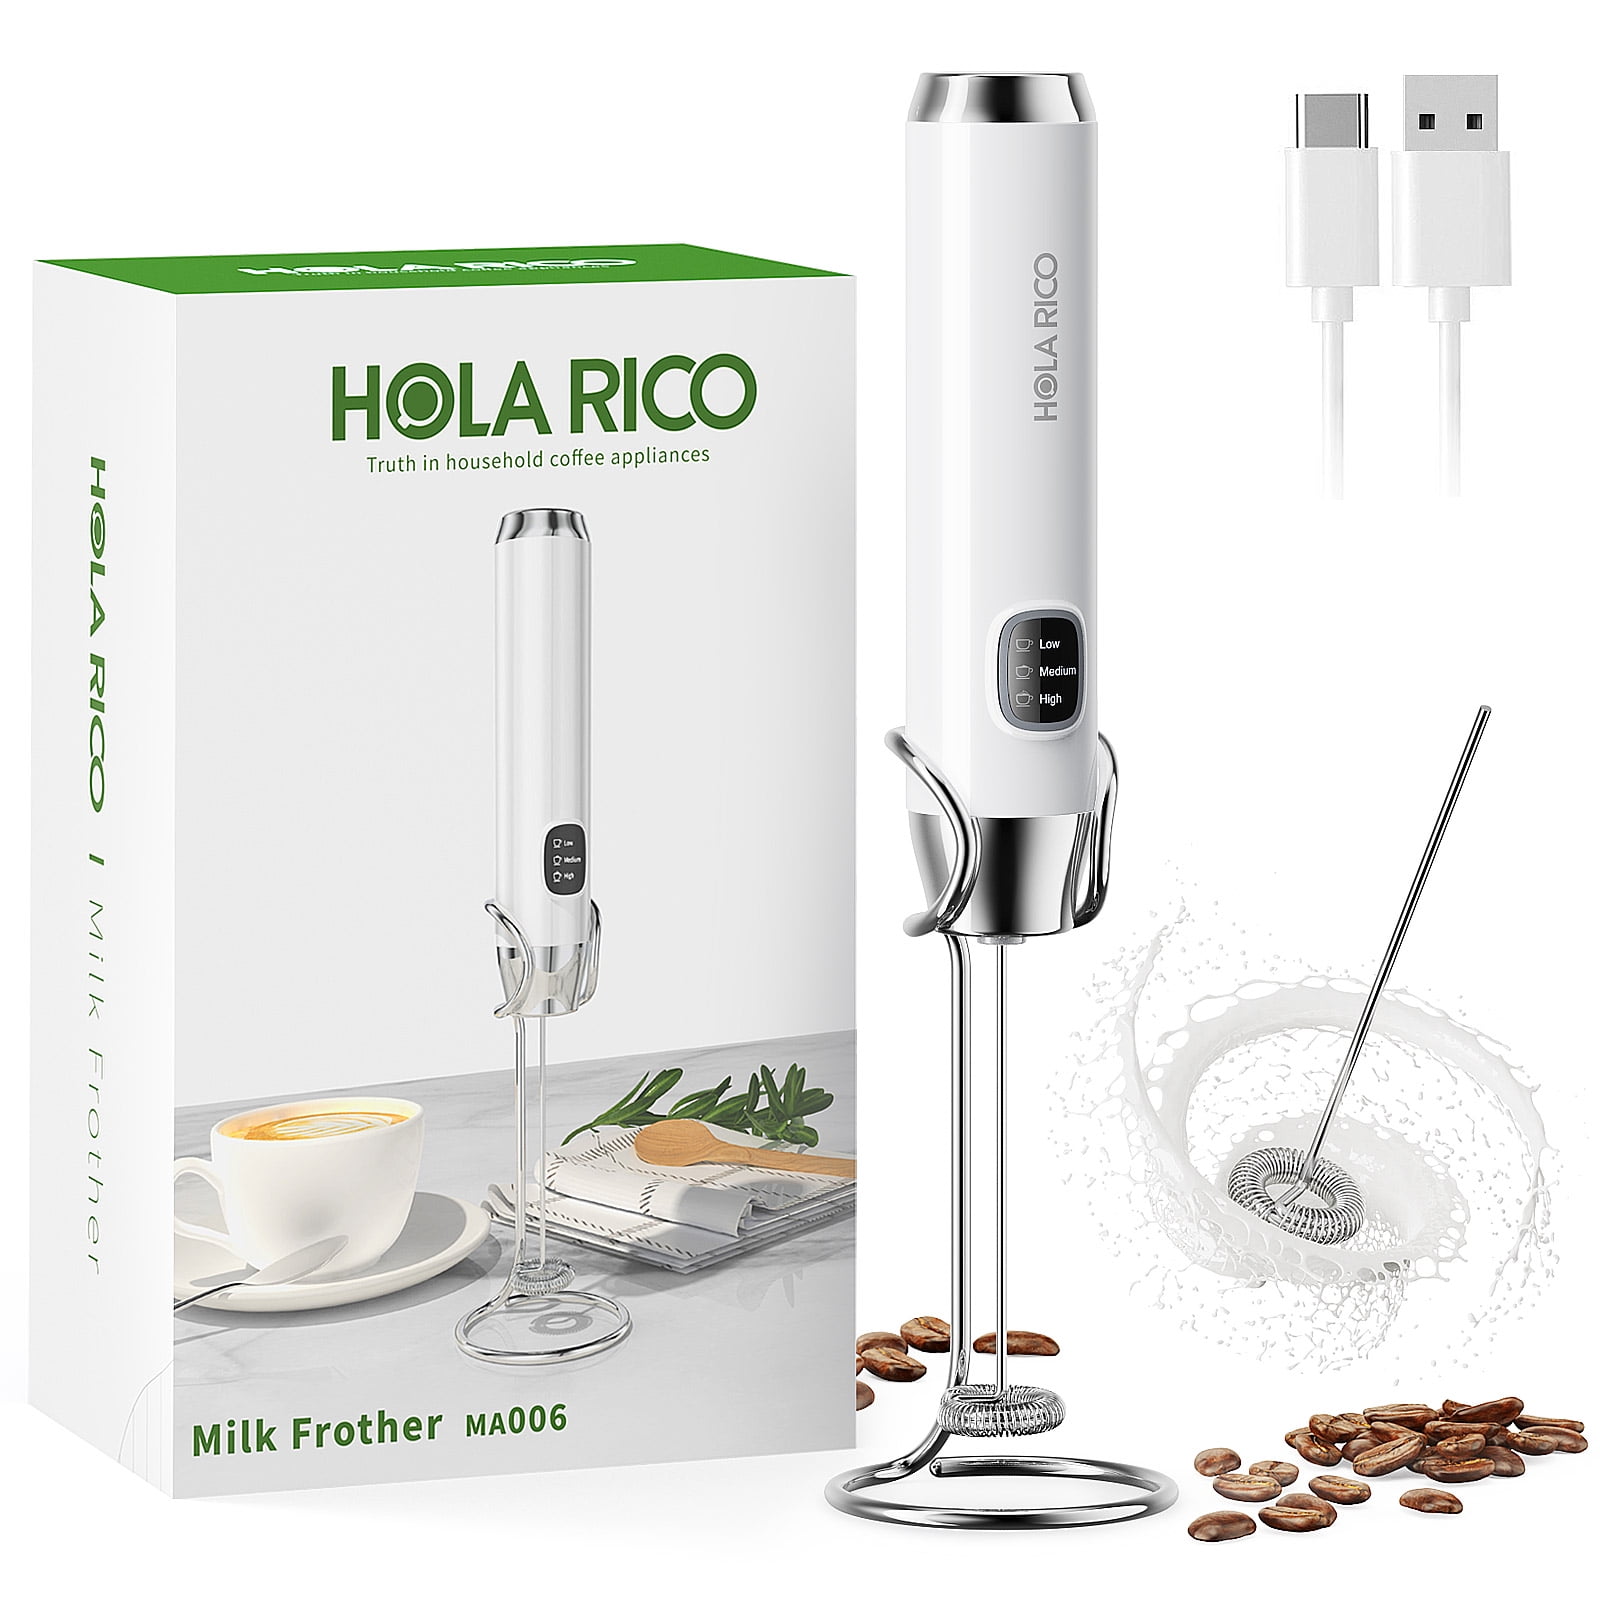 Handheld Electric Coffee Frother, 1.5 oz - Smith's Food and Drug